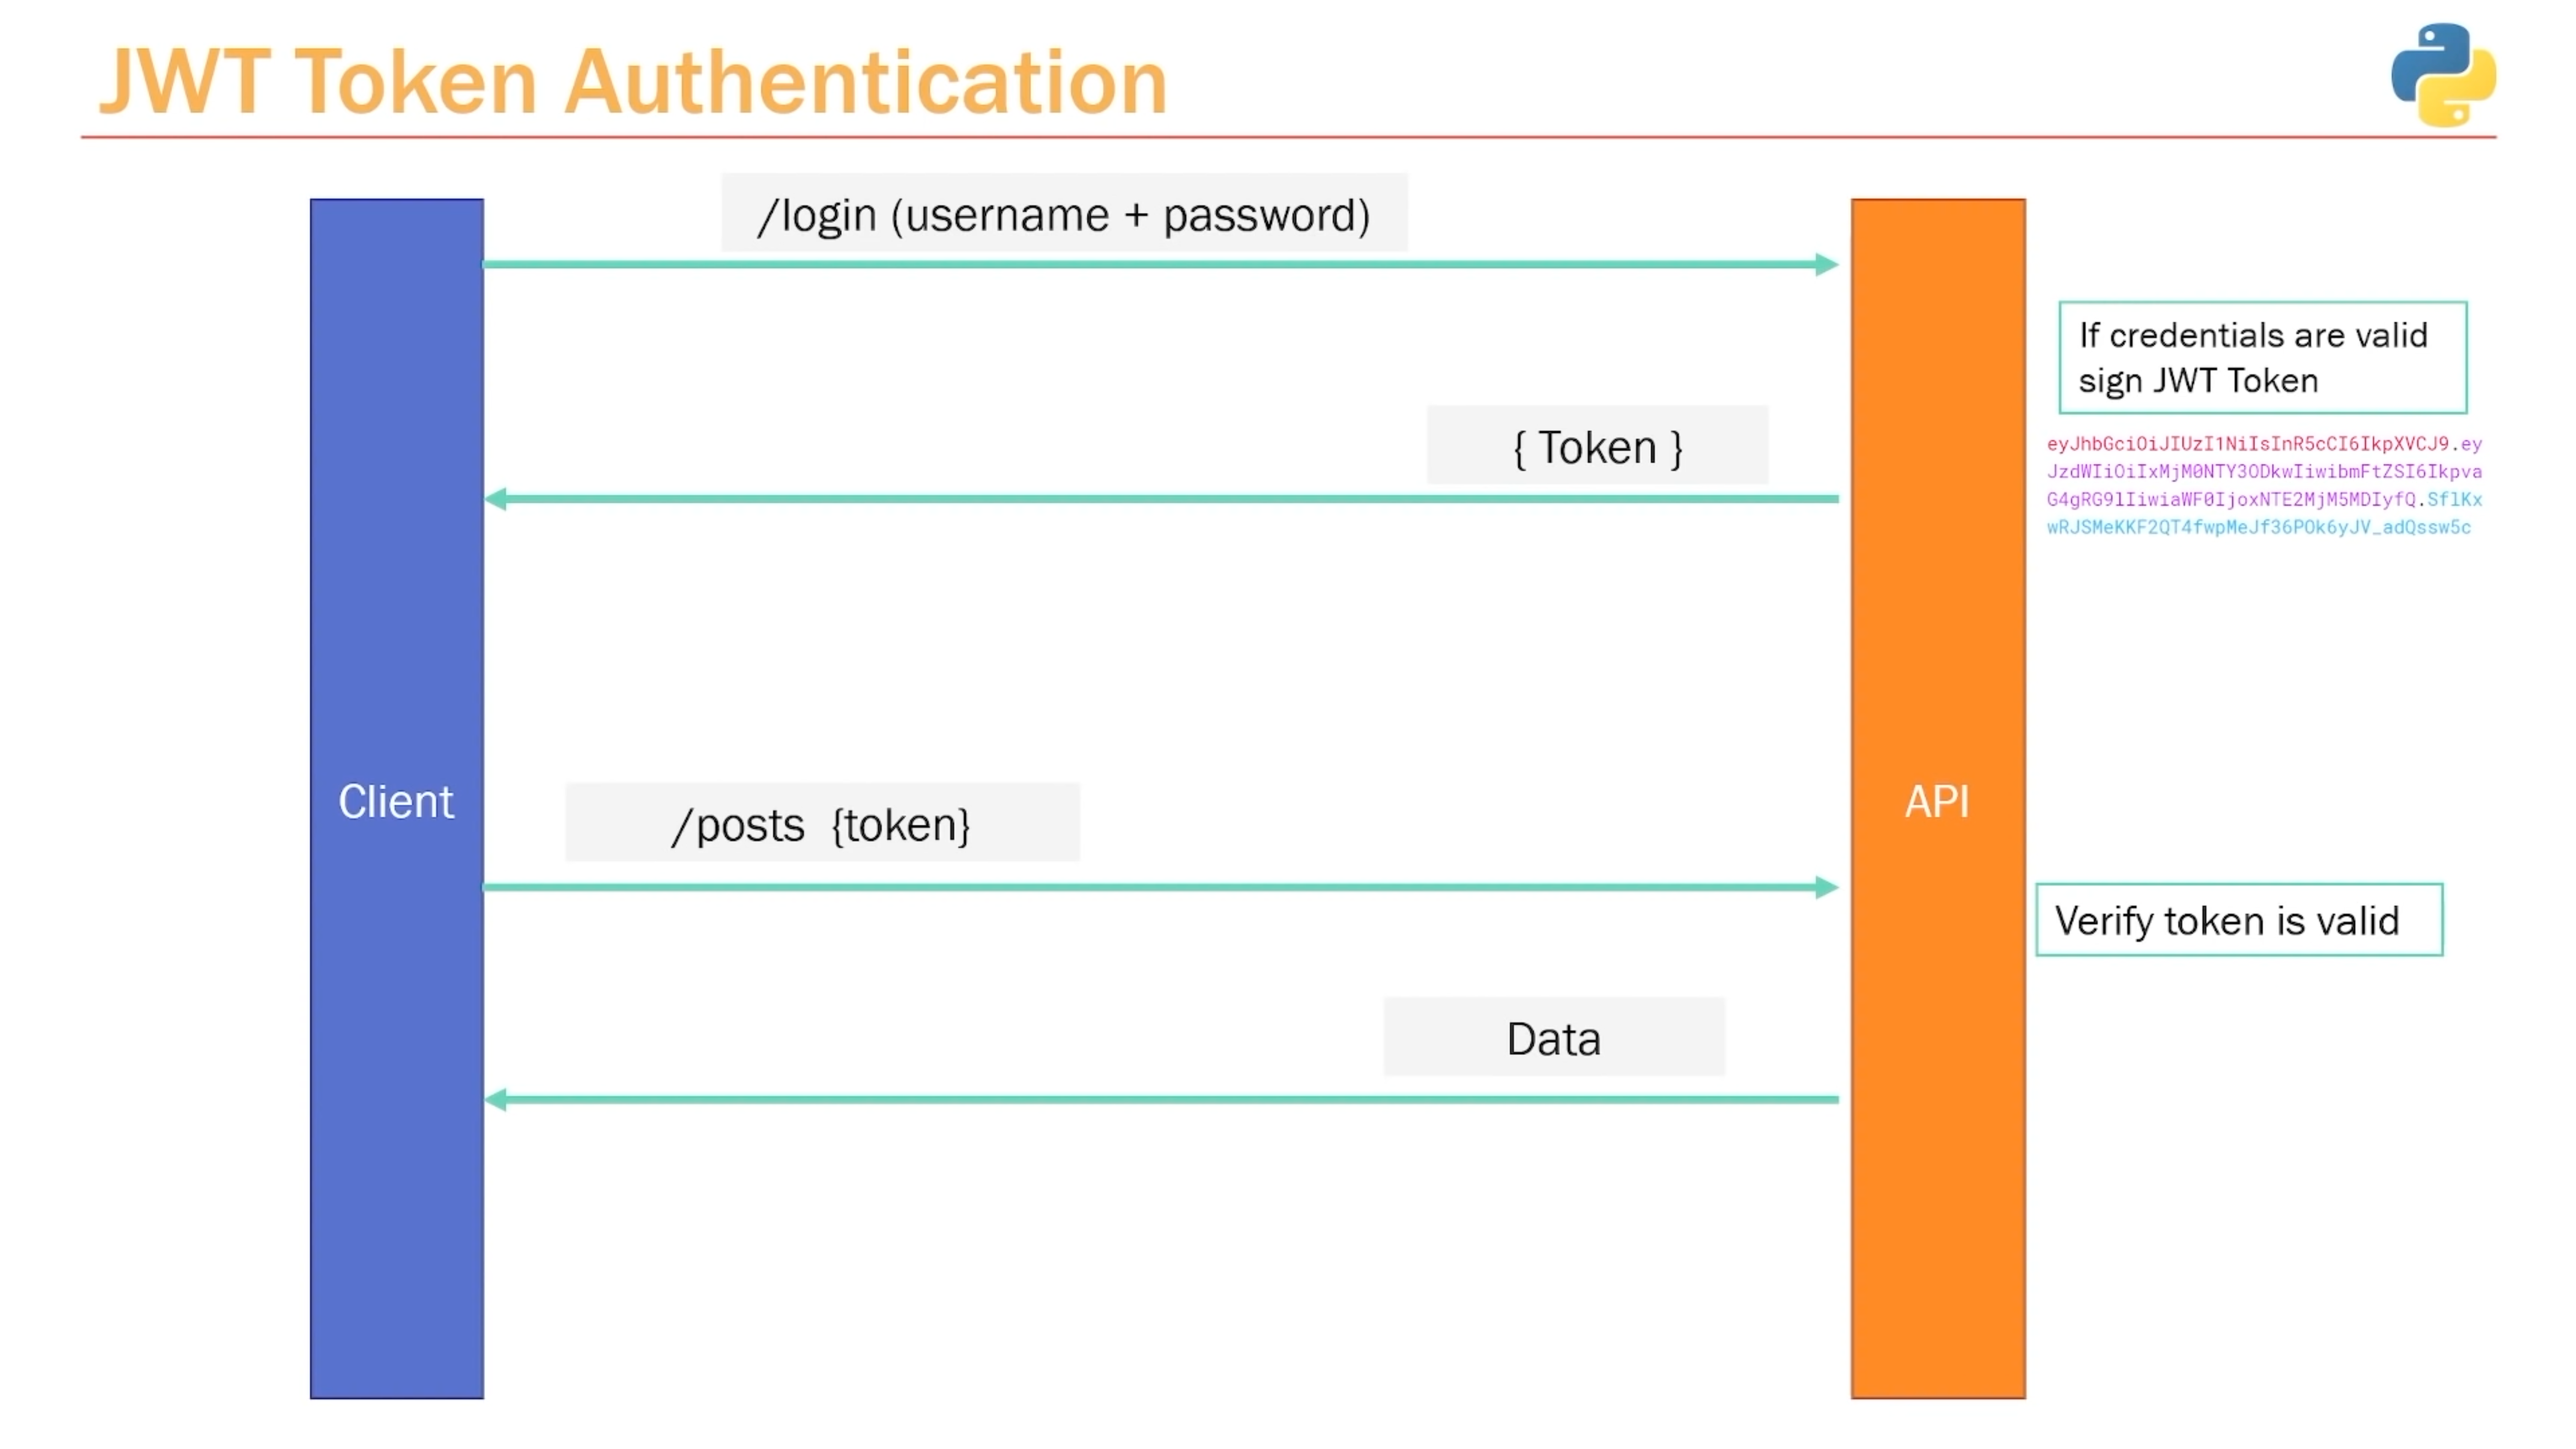 ../../_images/http-oauth2-jwt-sequence1.png